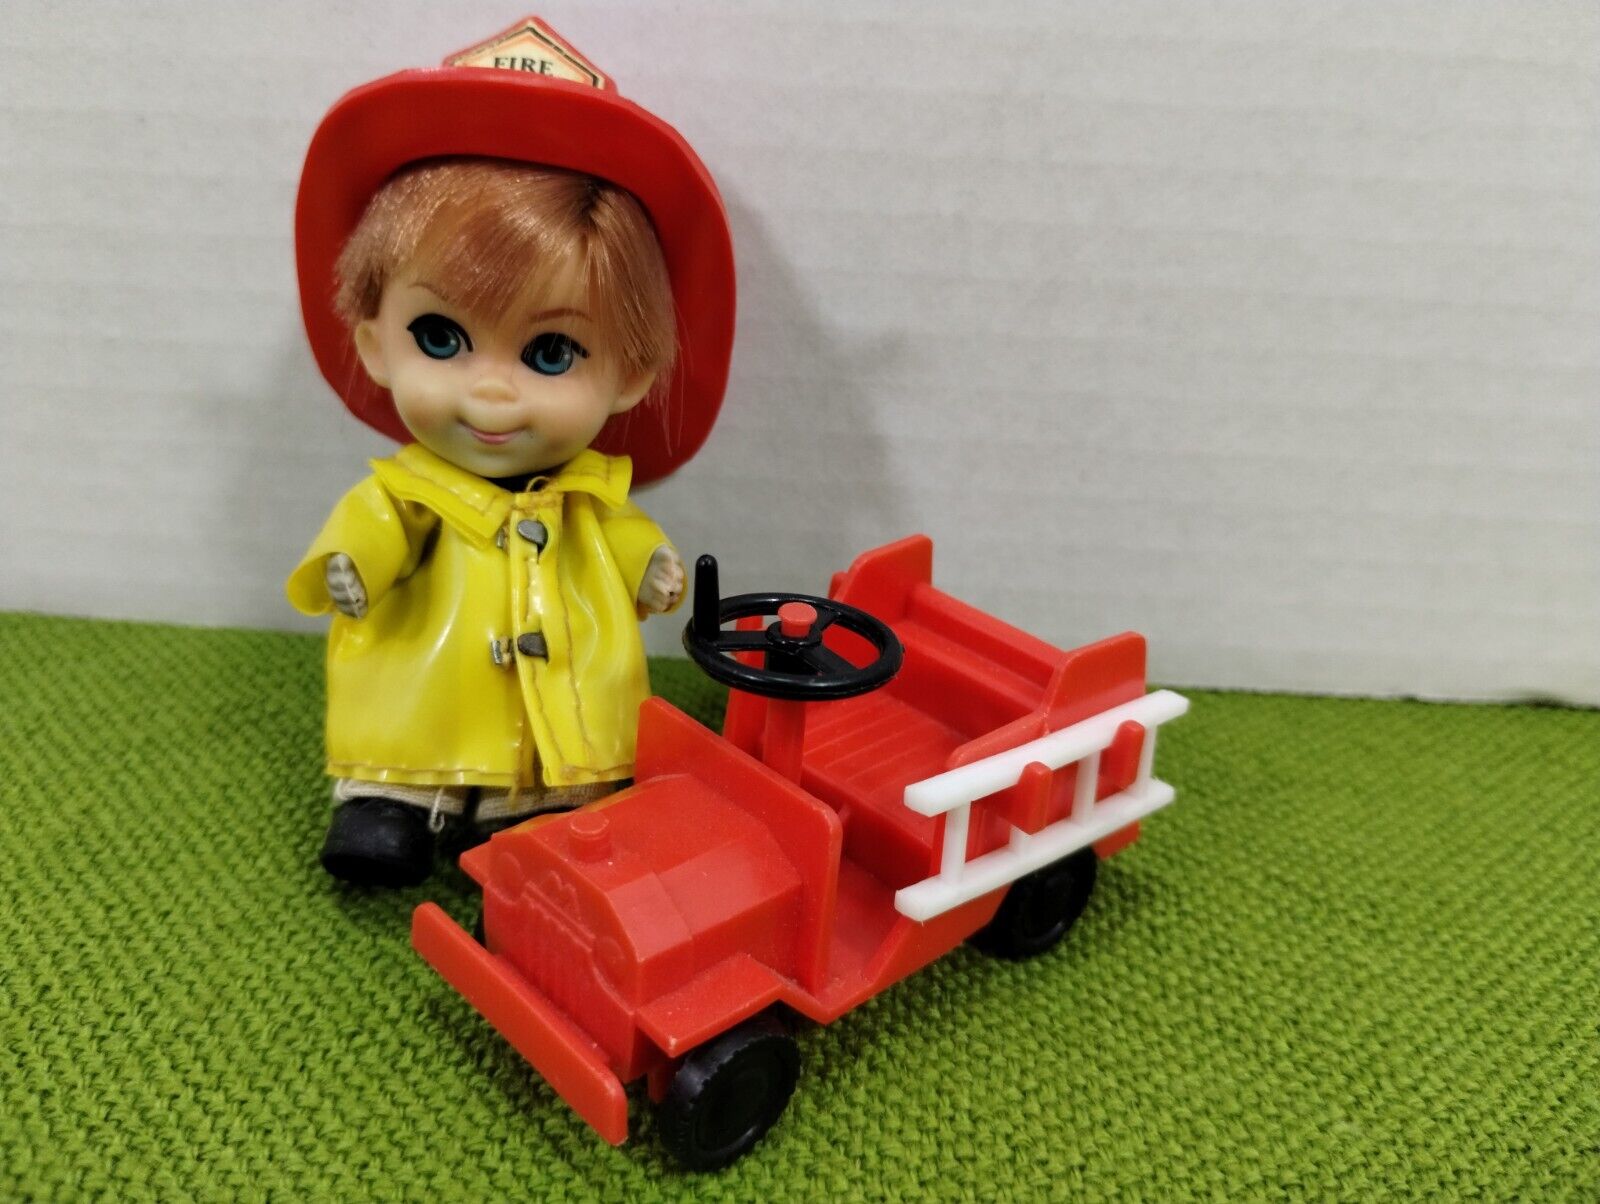 Vintage 1960s Mattel Liddle Kiddle Bunson Berine Doll With Fire Truck And Outfit